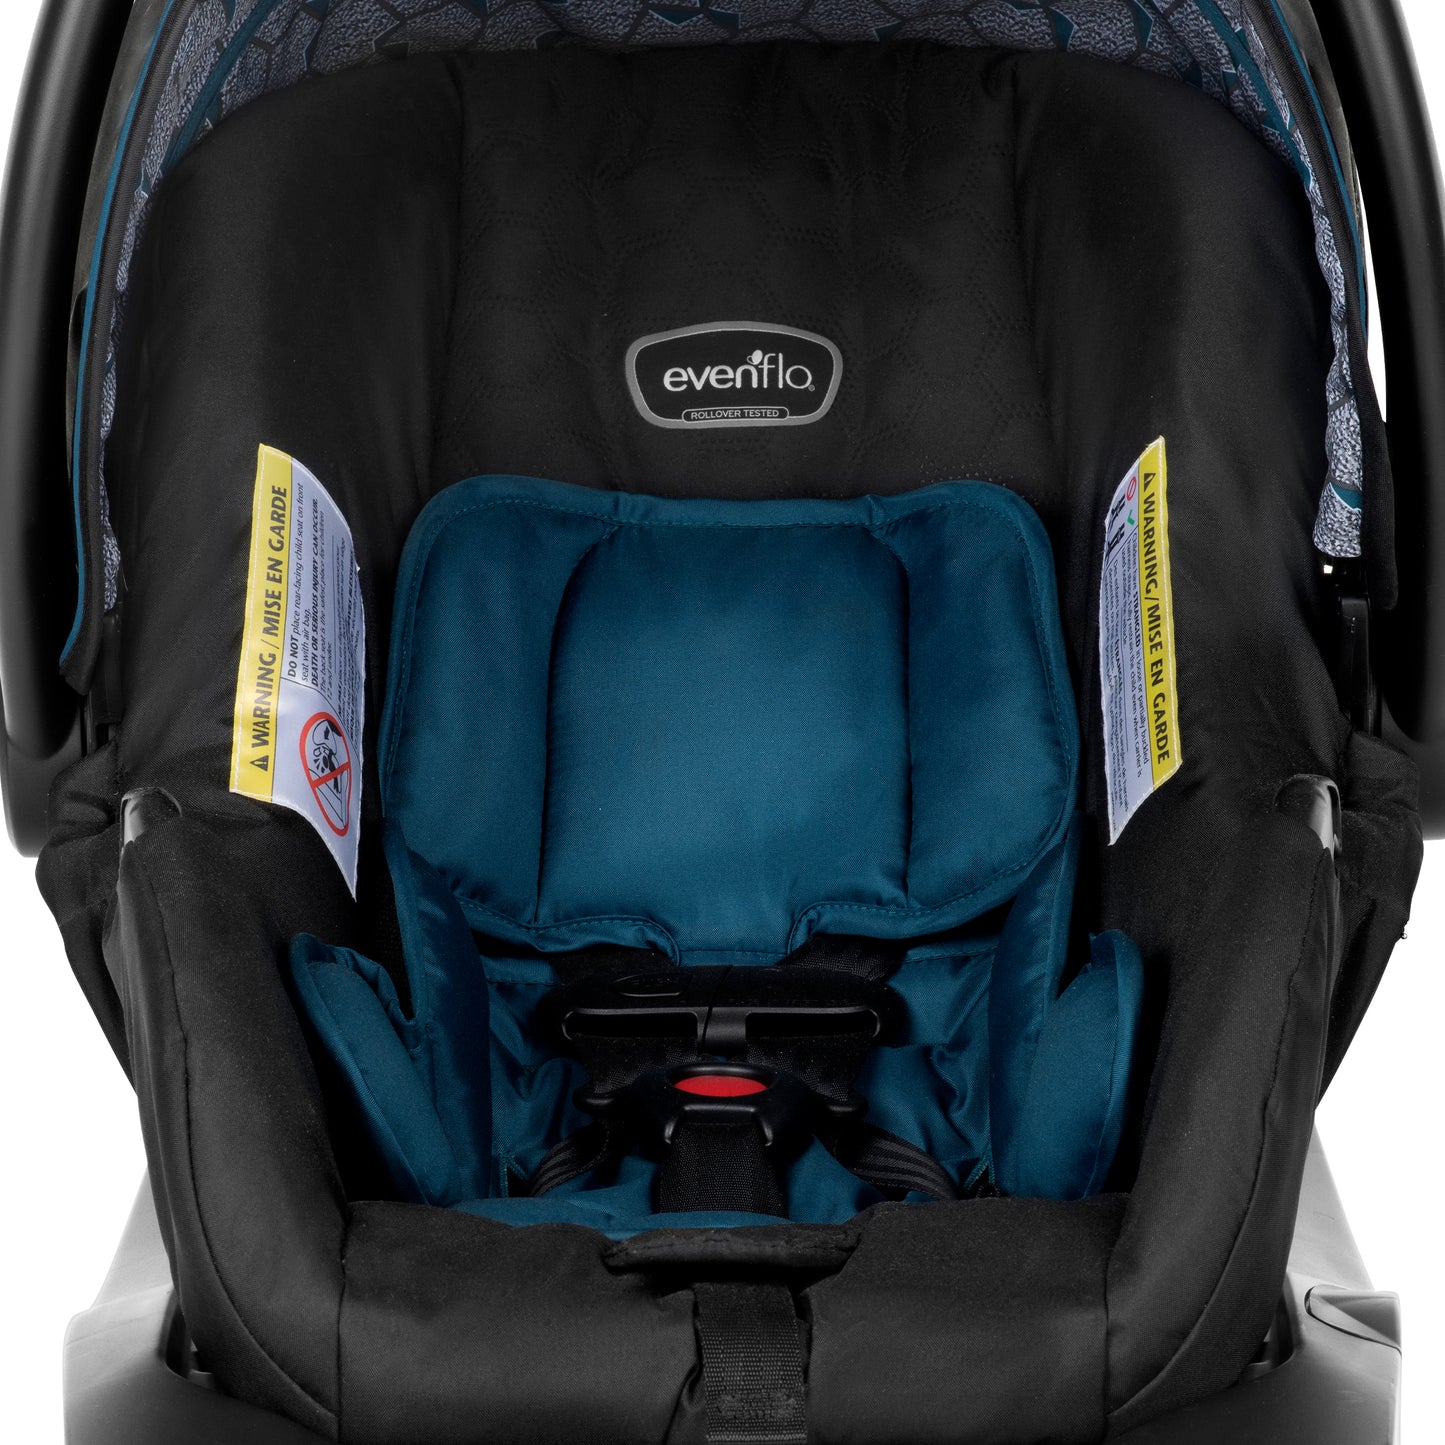 Clover Travel System with LiteMax Infant Car Seat